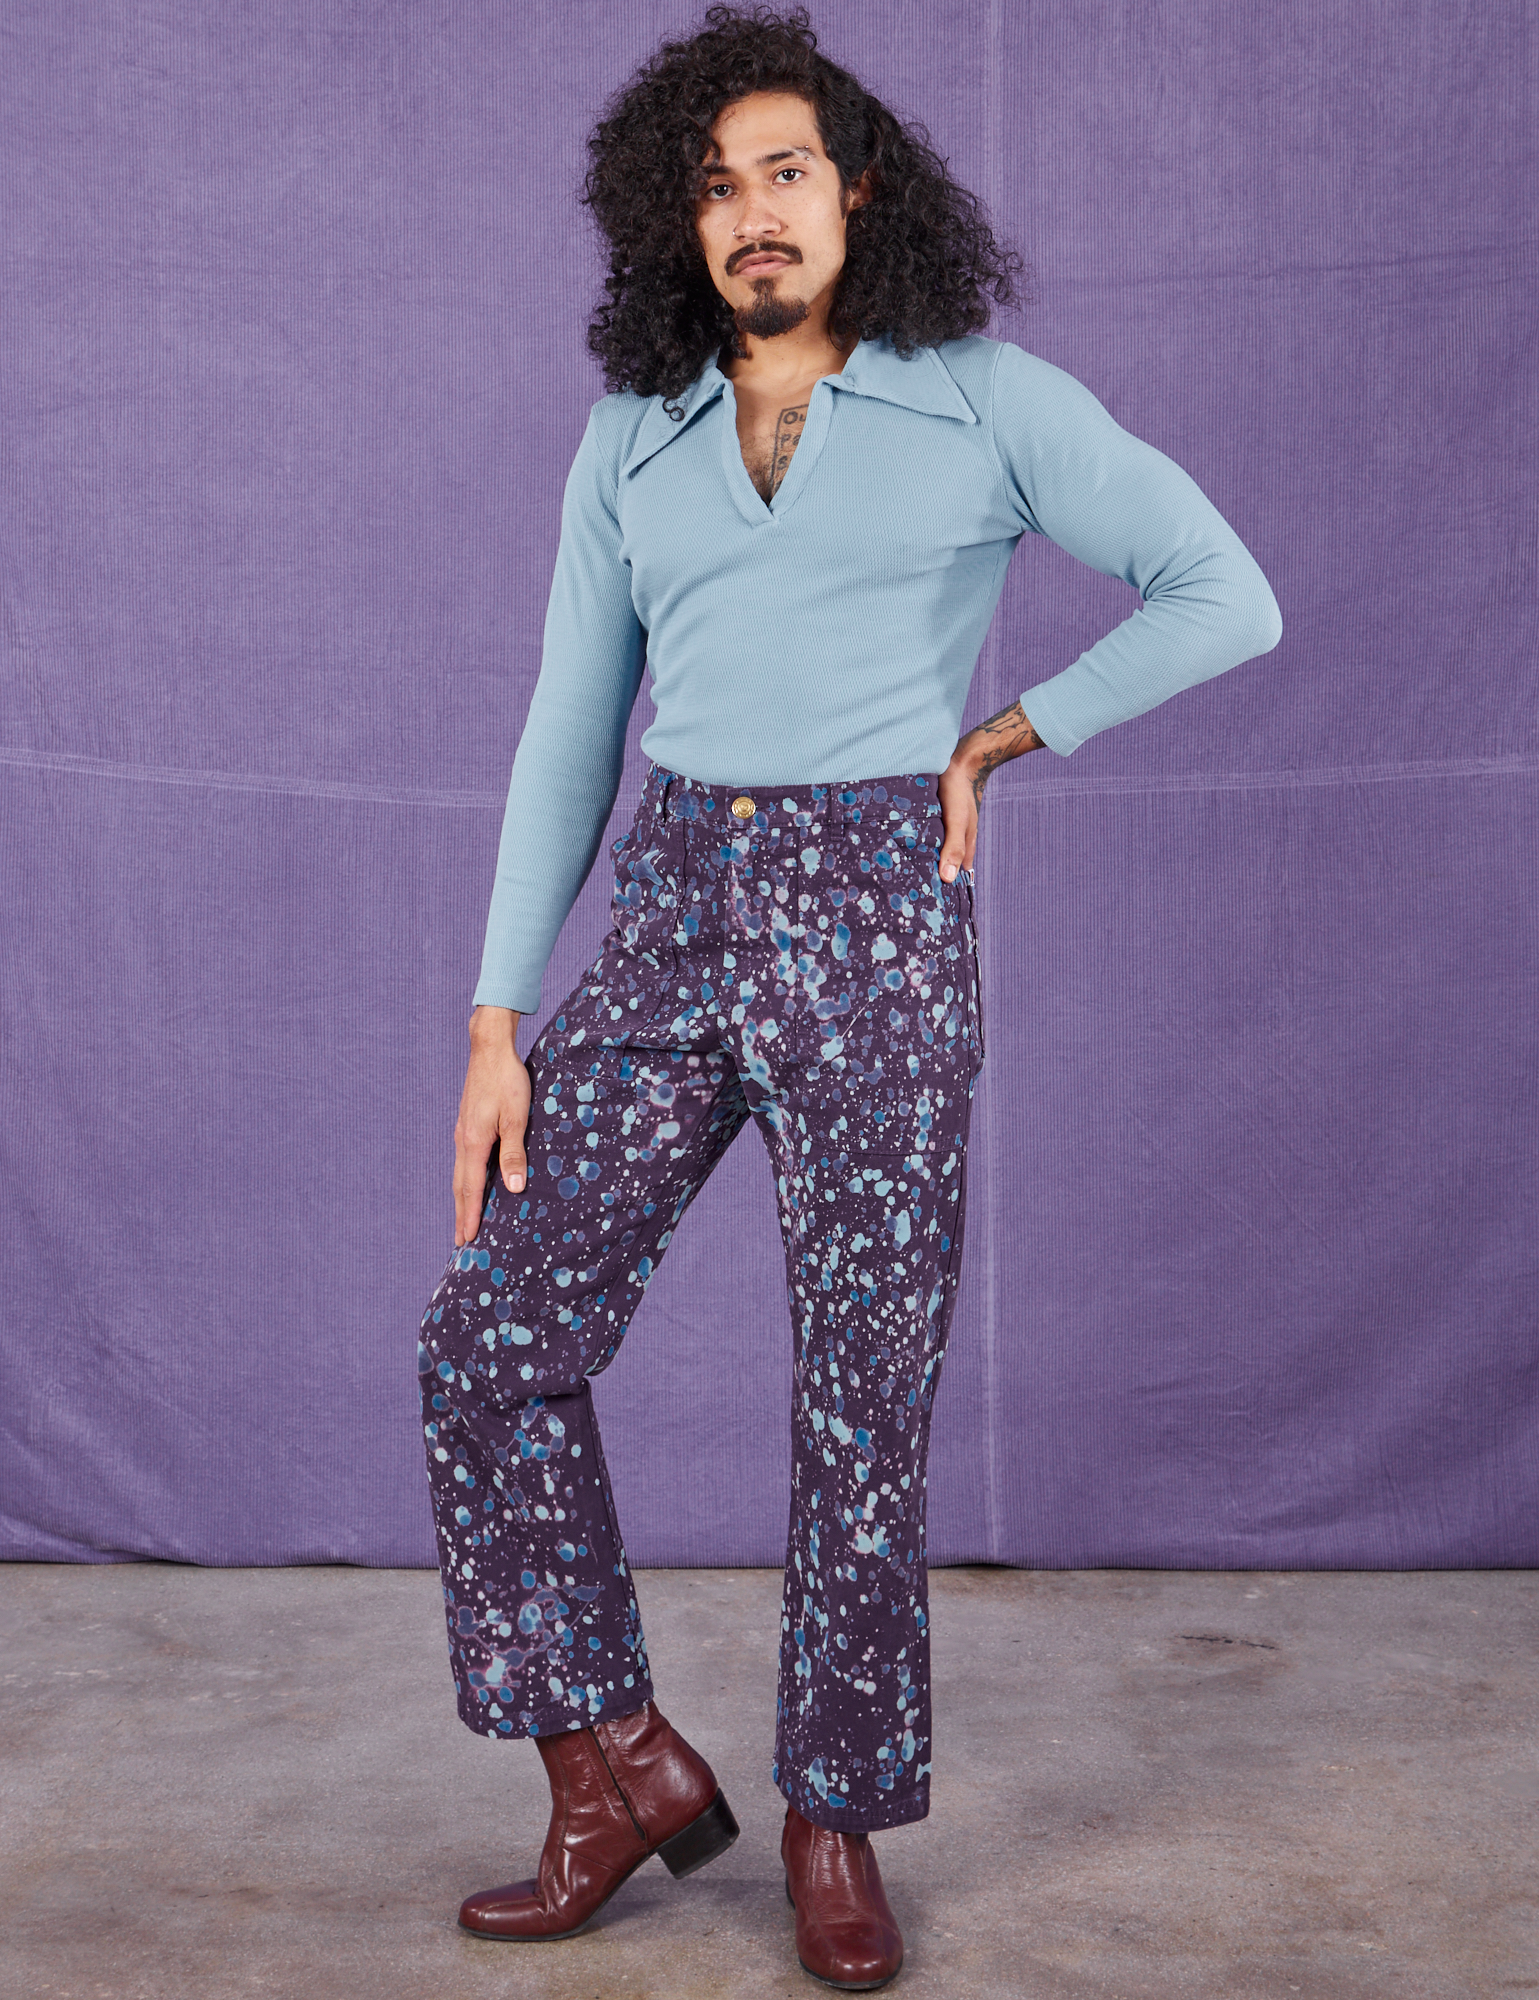 Jesse is 5&#39;8&quot; and wearing XS Marble Splatter Work Pants in Nebula Purple paired with baby blue Long Sleeve Fisherman Polo